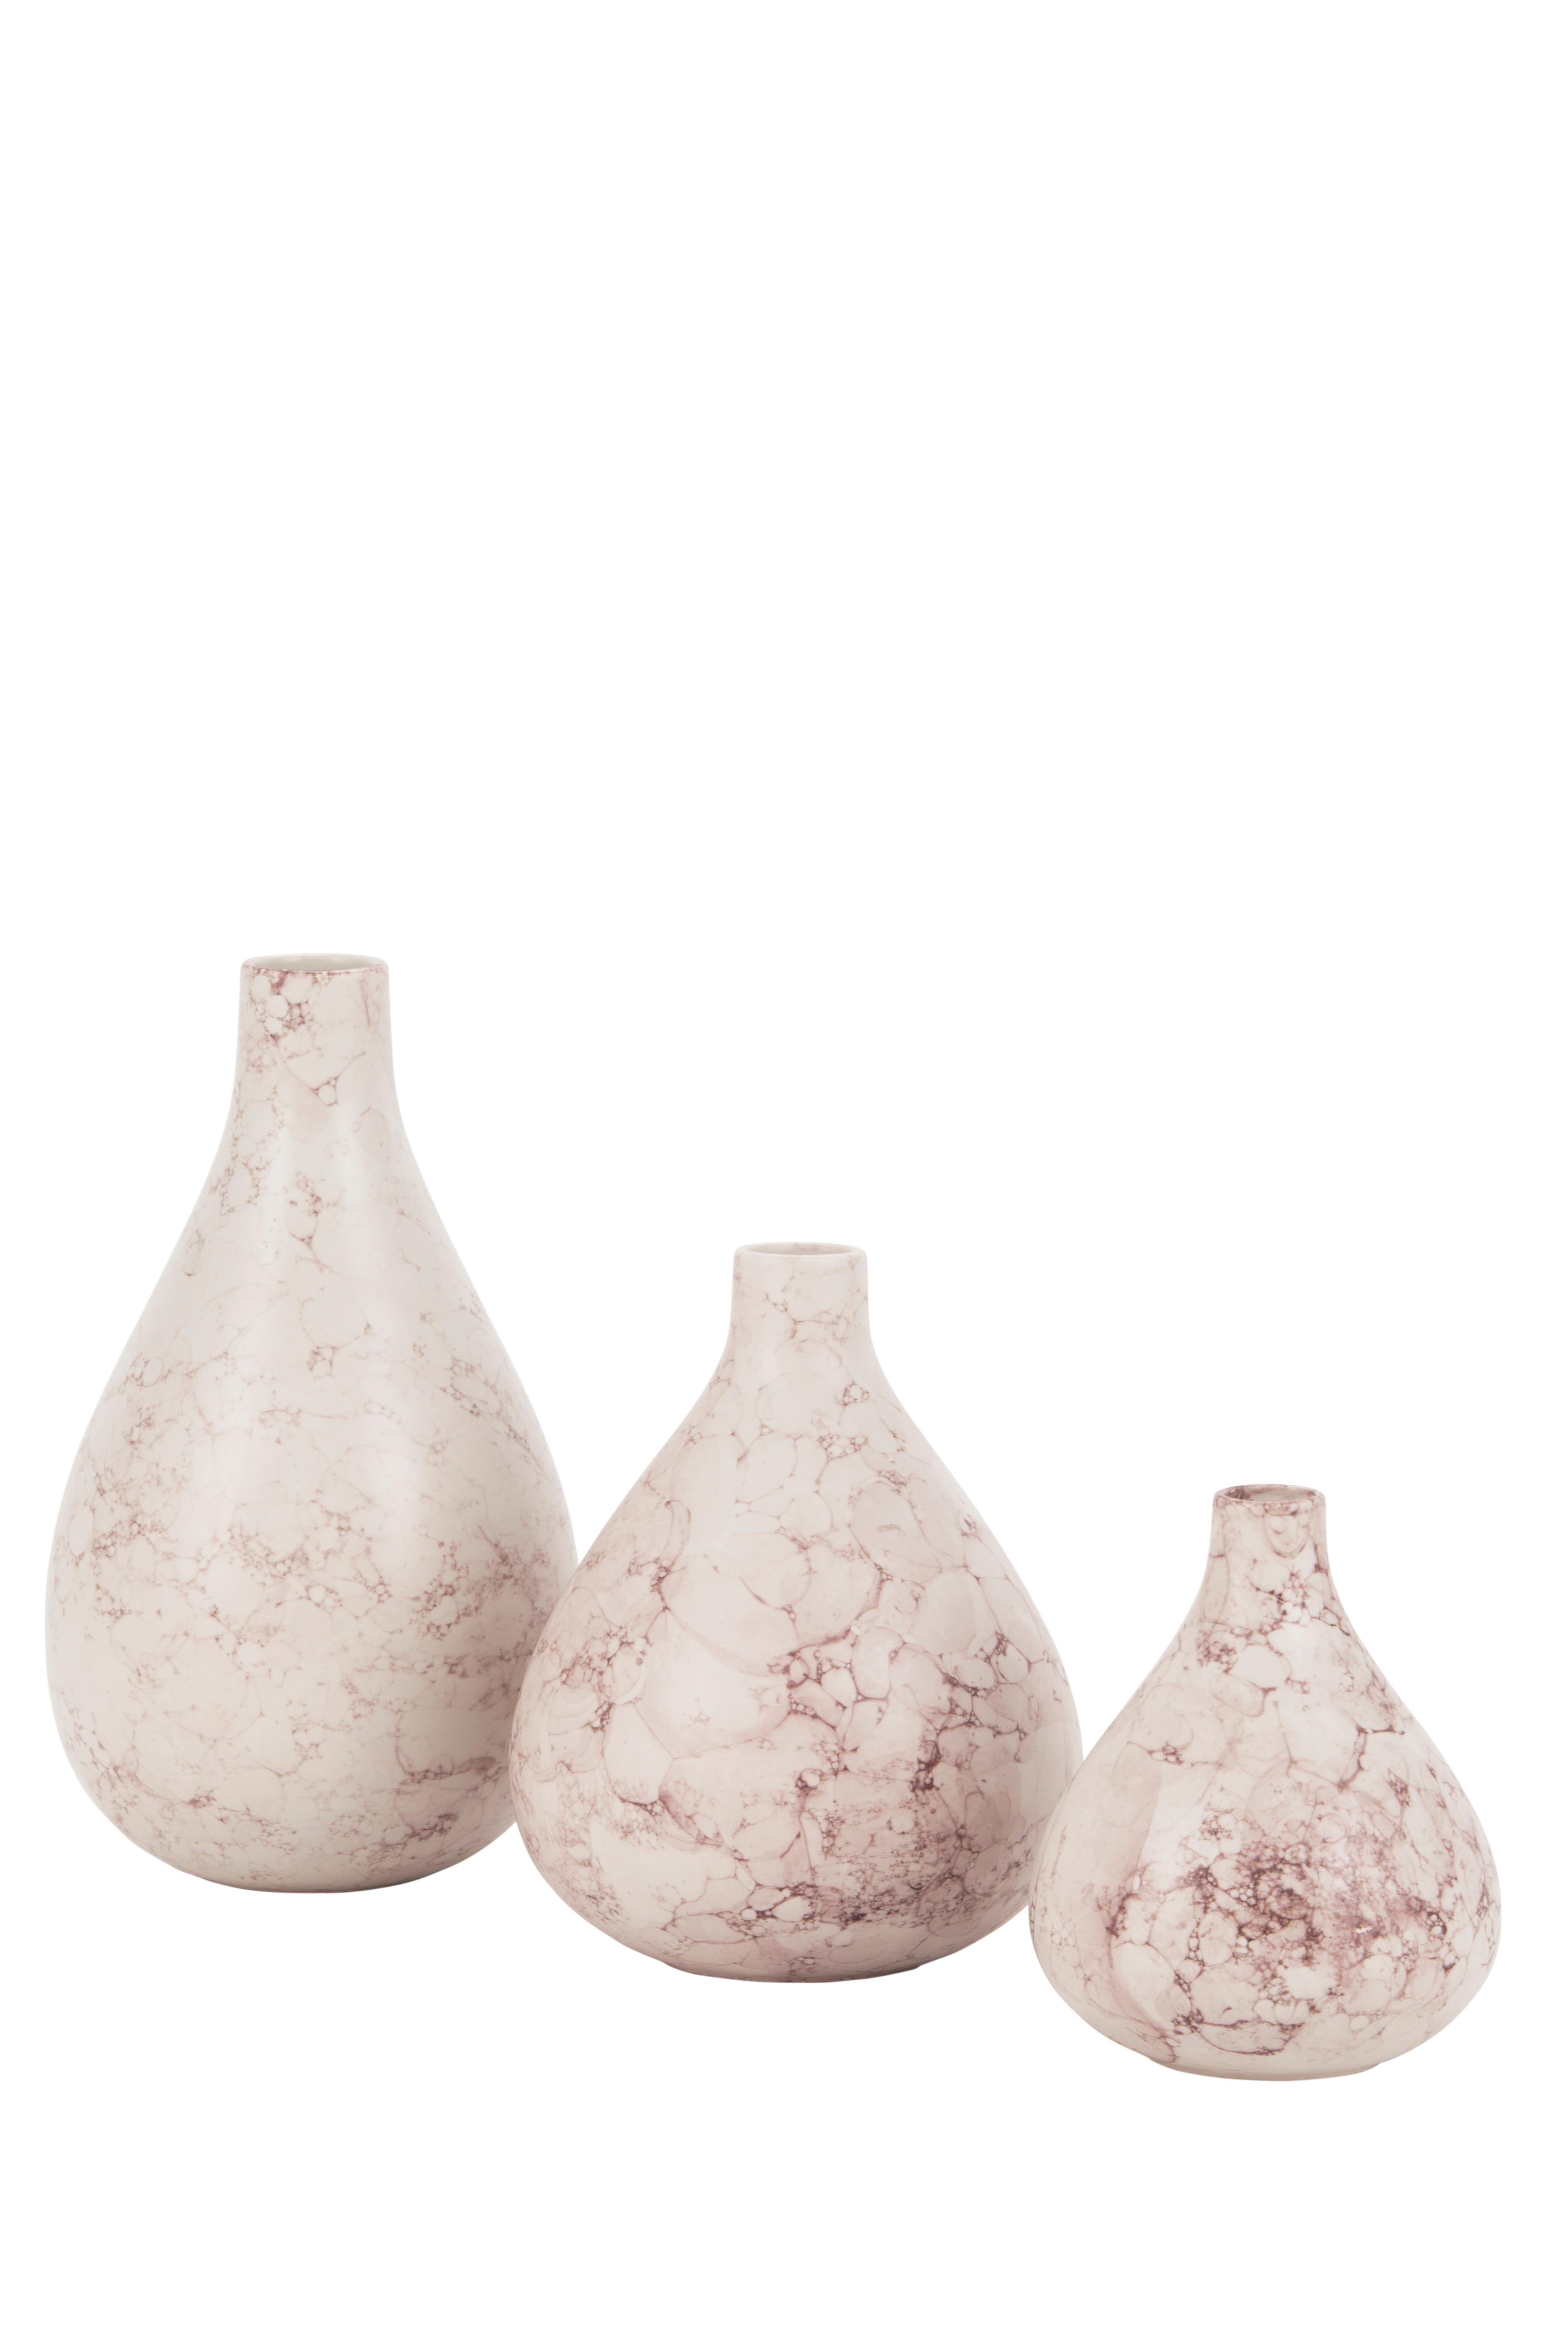 Portuguese Set/8 Ceramic Jars & Pots, White & Pink, Handmade in Portugal by Lusitanus Home For Sale